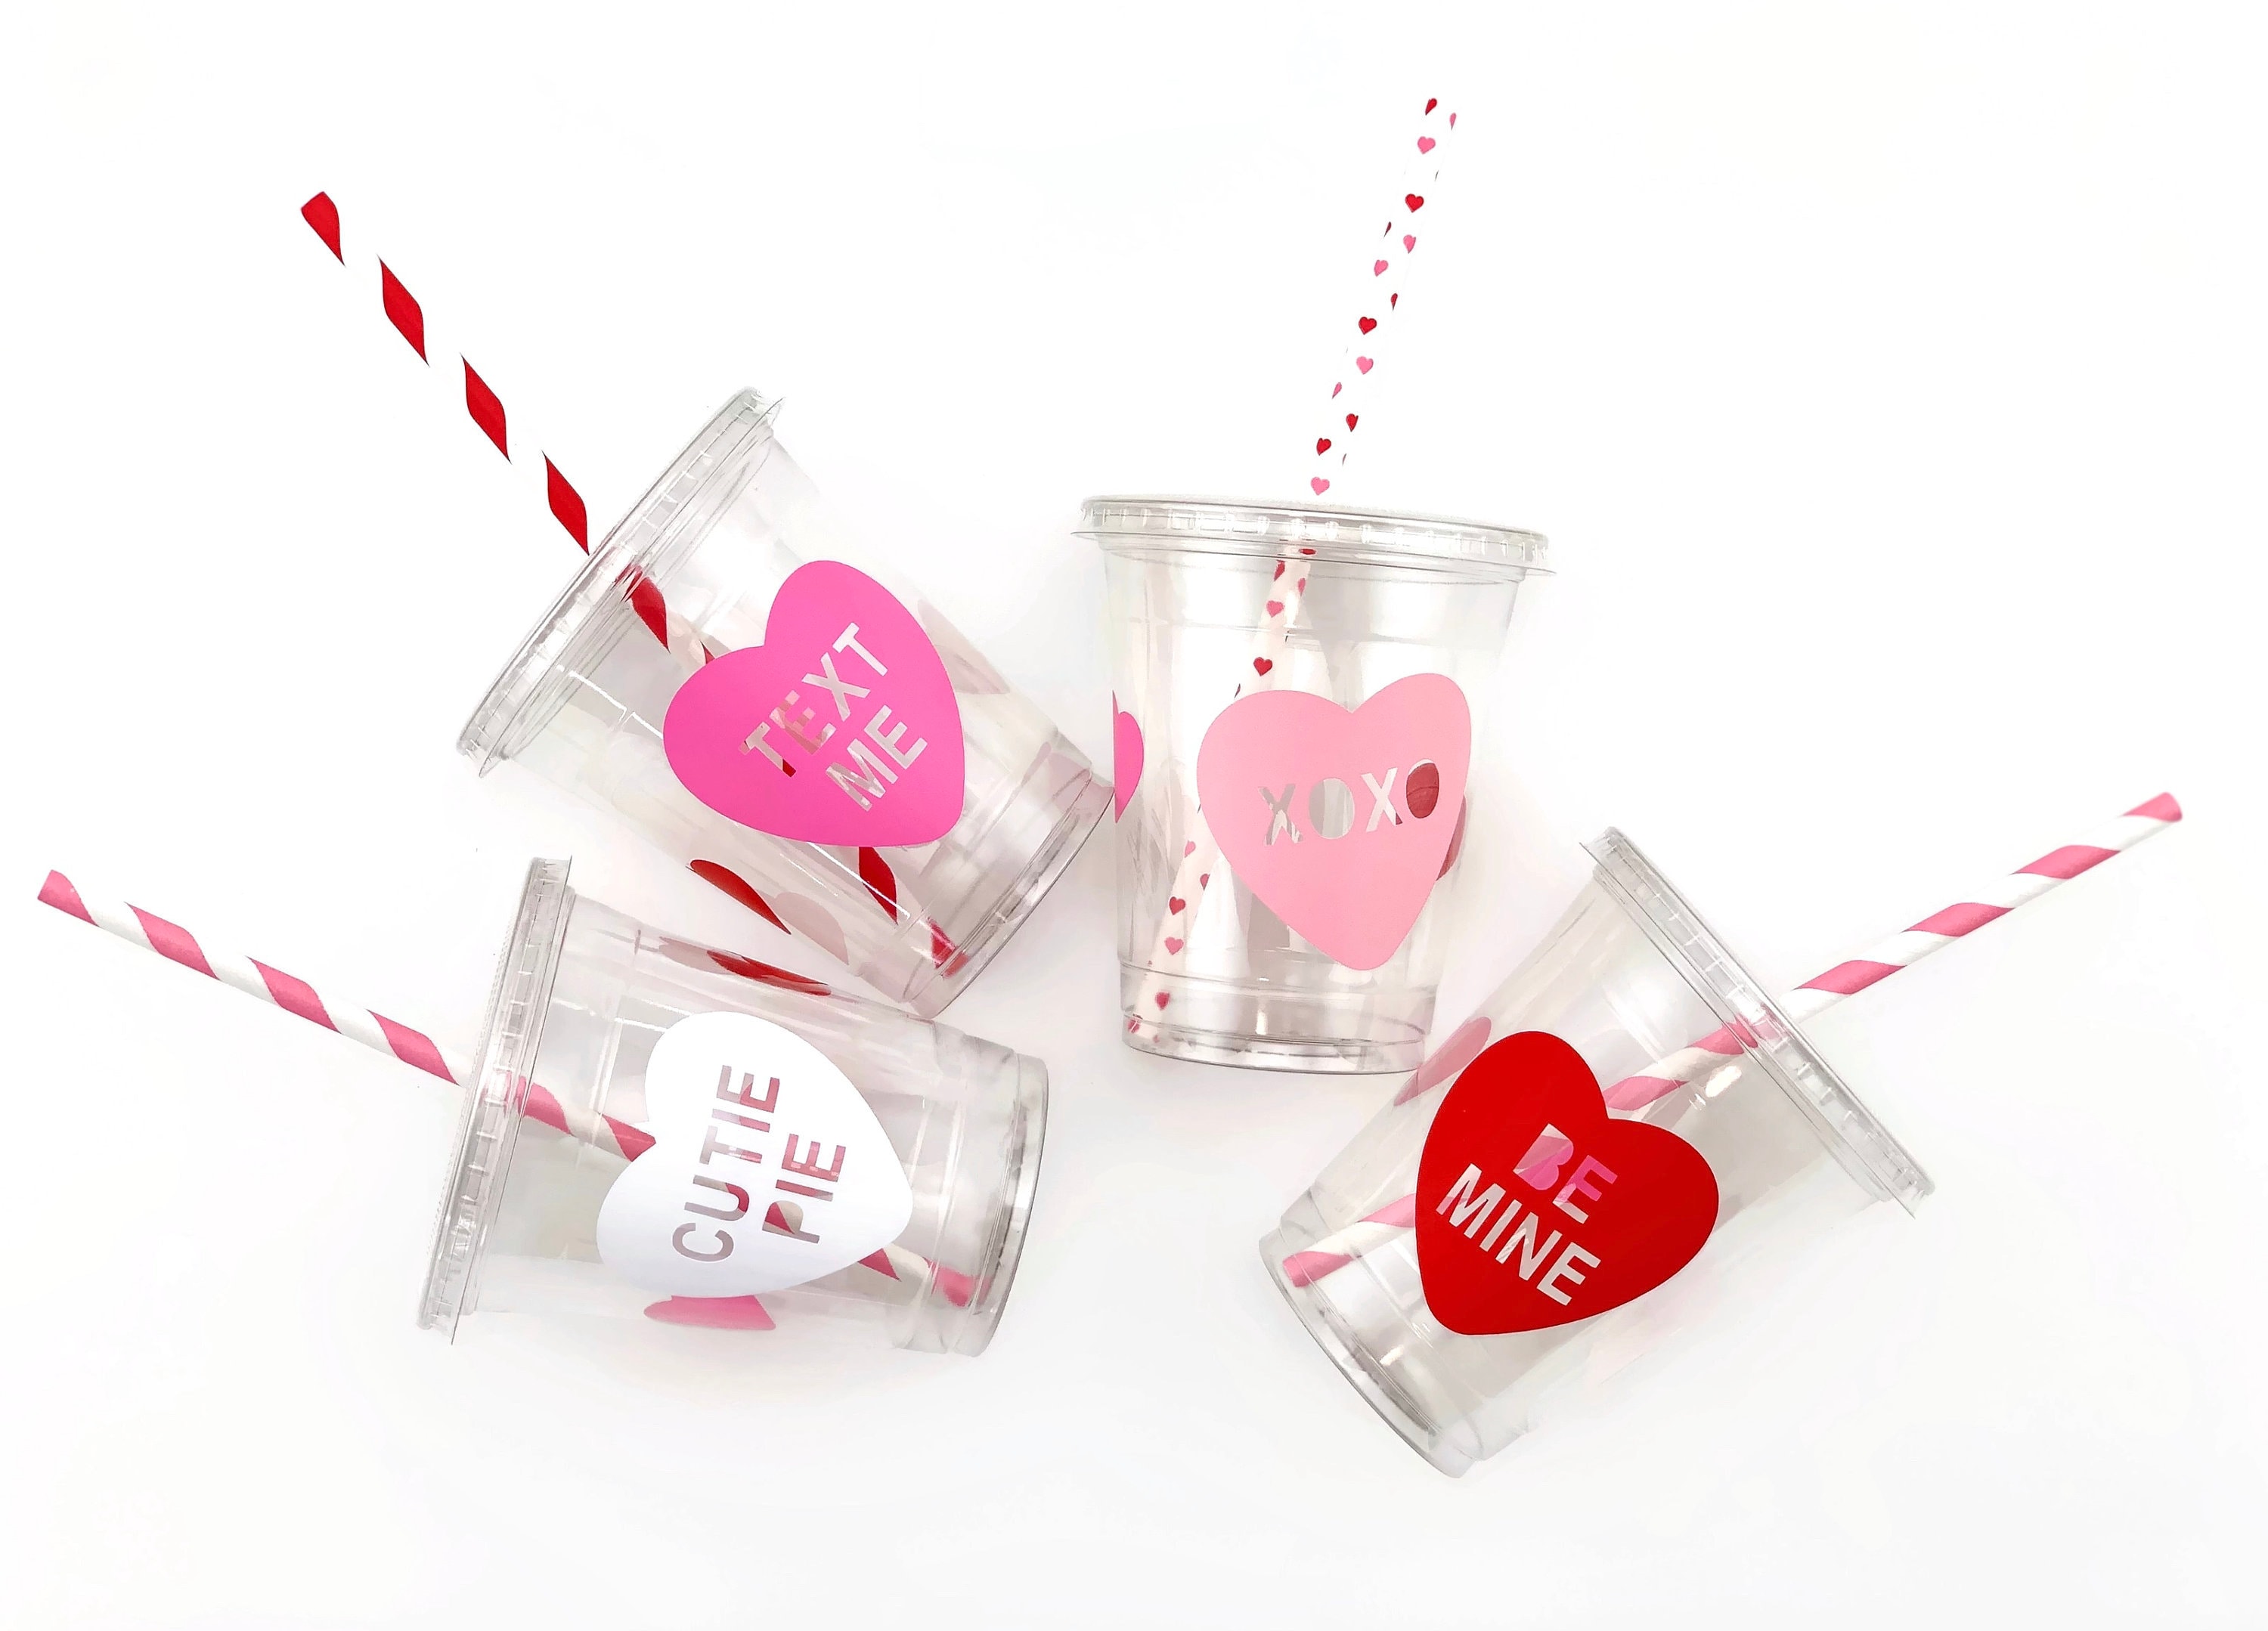 HAPPY VALENTINE'S DAY HEARTS FROST FLEX CUPS - Magpies Gifts